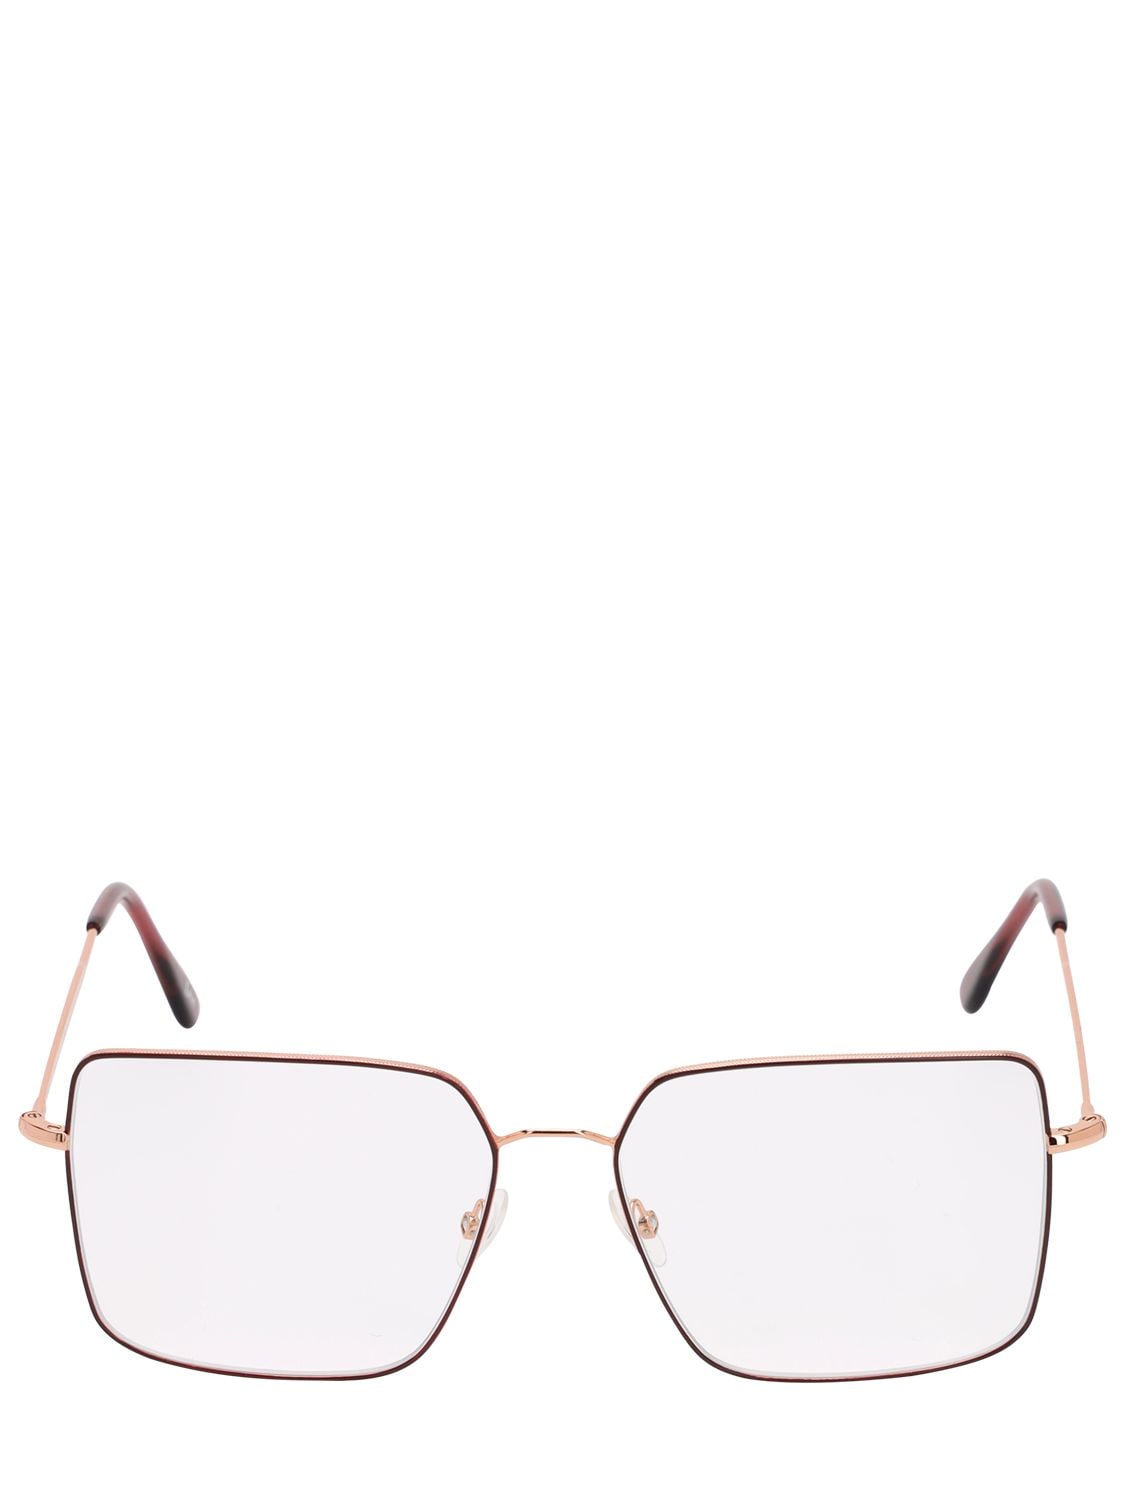 Andy Wolf Squared Metal Optical Glasses In Rose Gold,clear